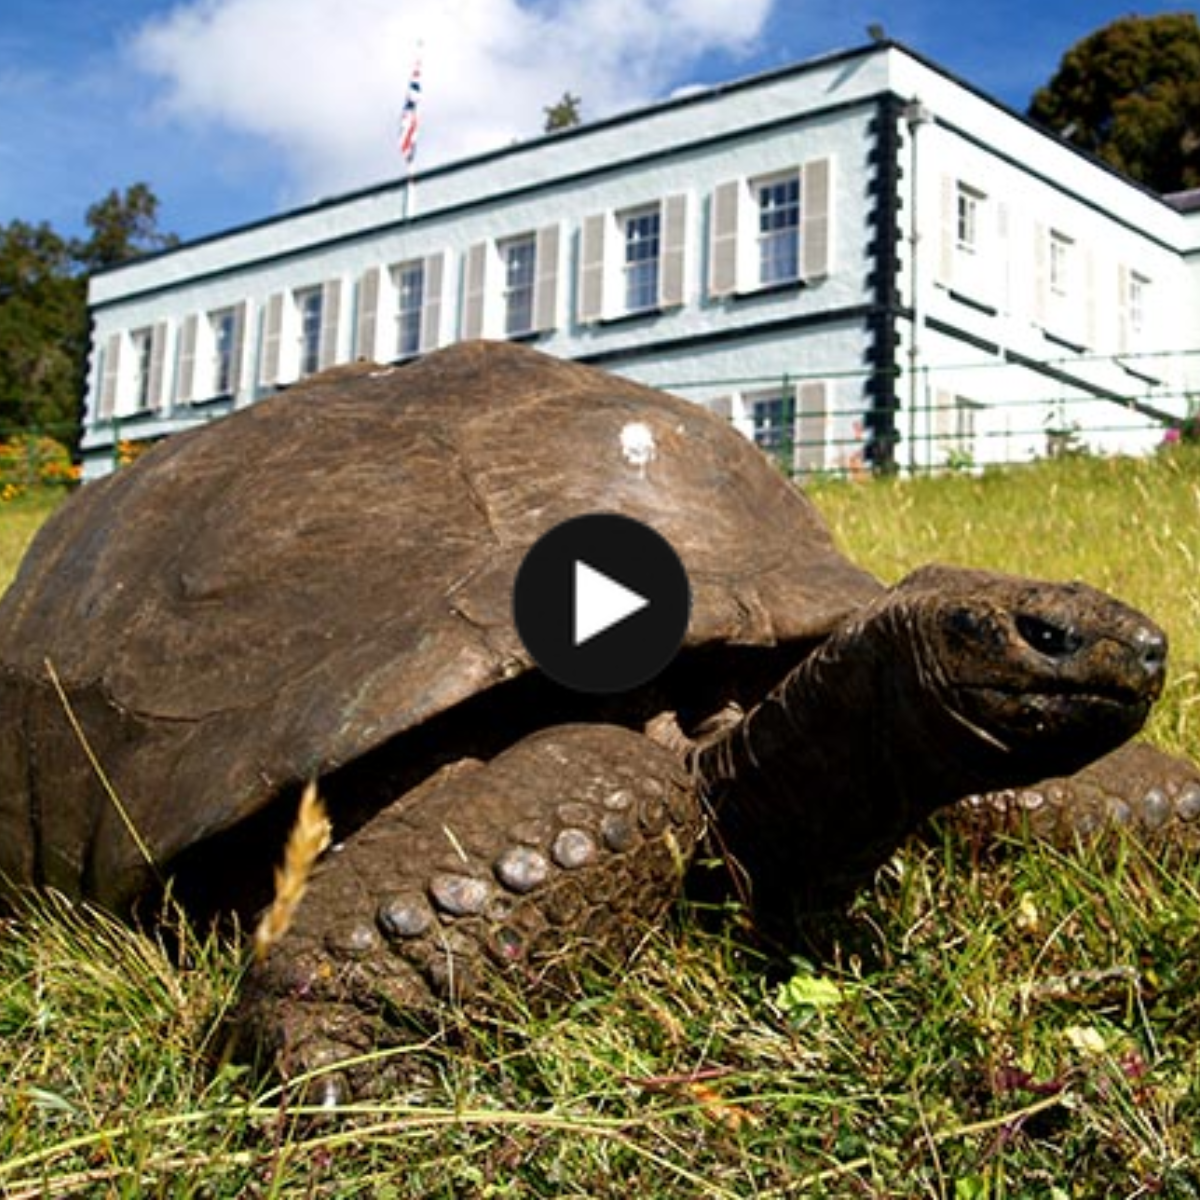 Jonathan, a 190-year-old turtle, is the world’s oldest living turtle.